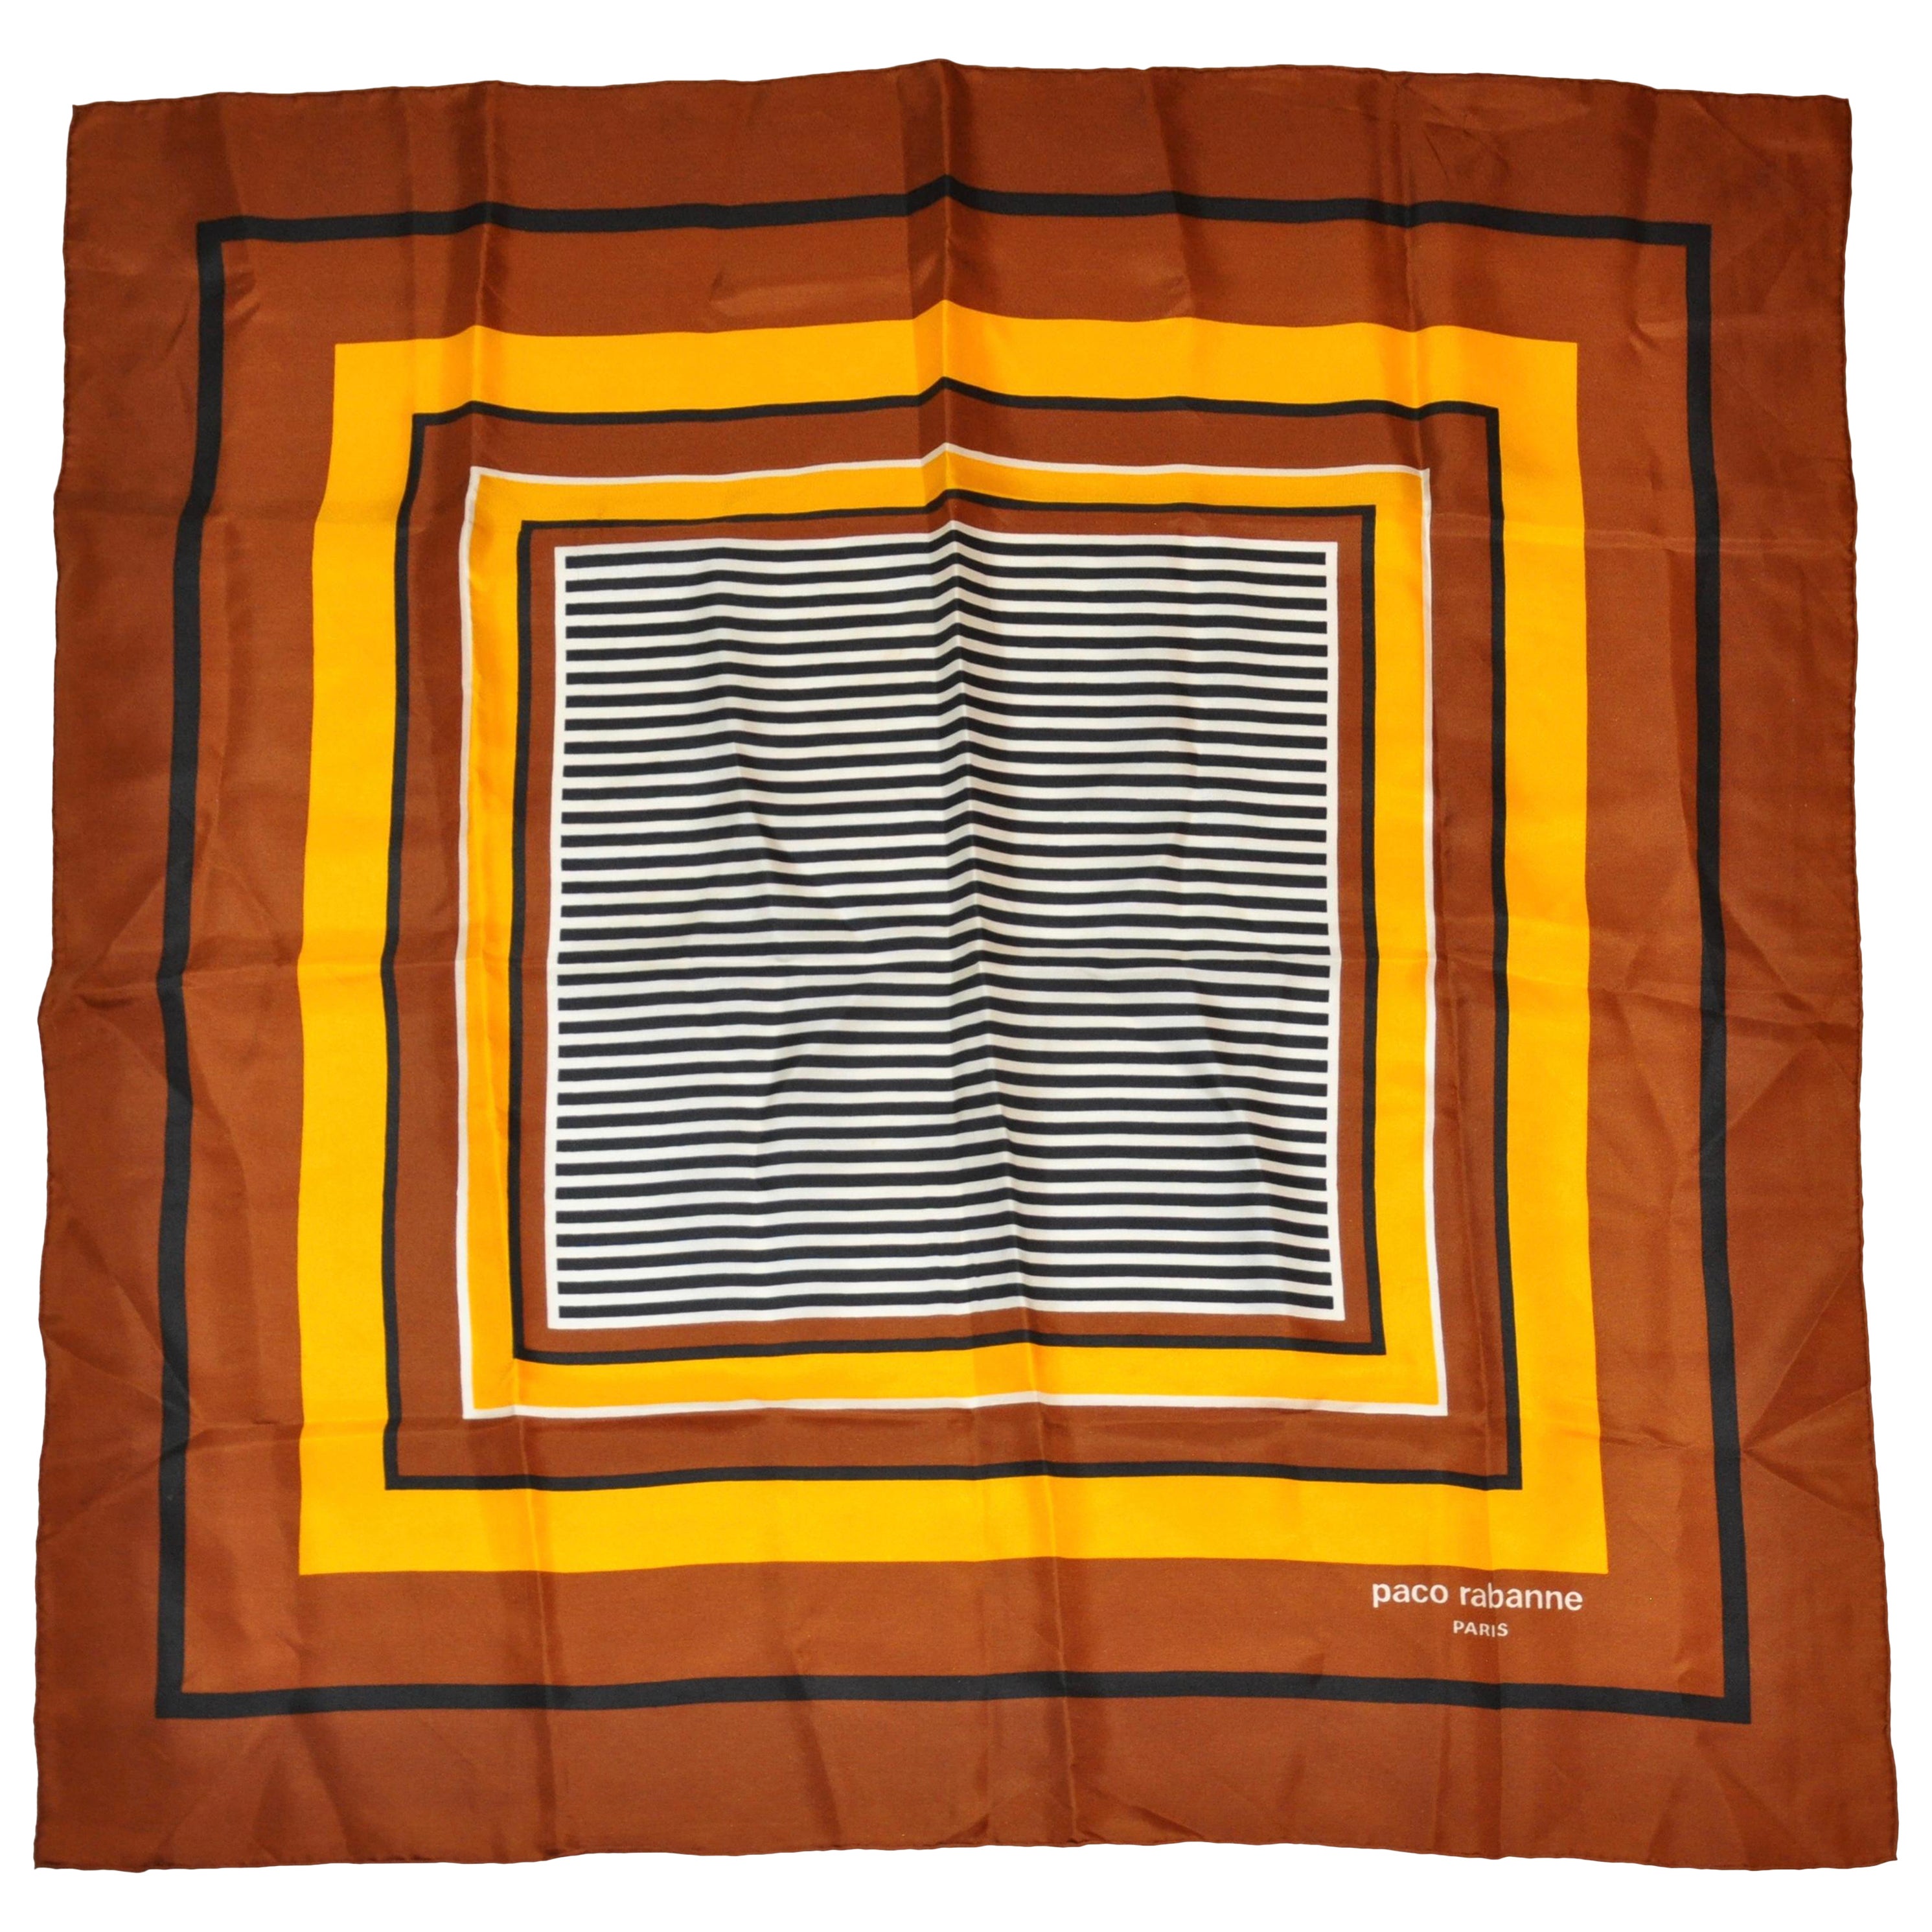 Paco Rabanne Rich Shades of Browns and Yellow Striped Center Silk Scarf